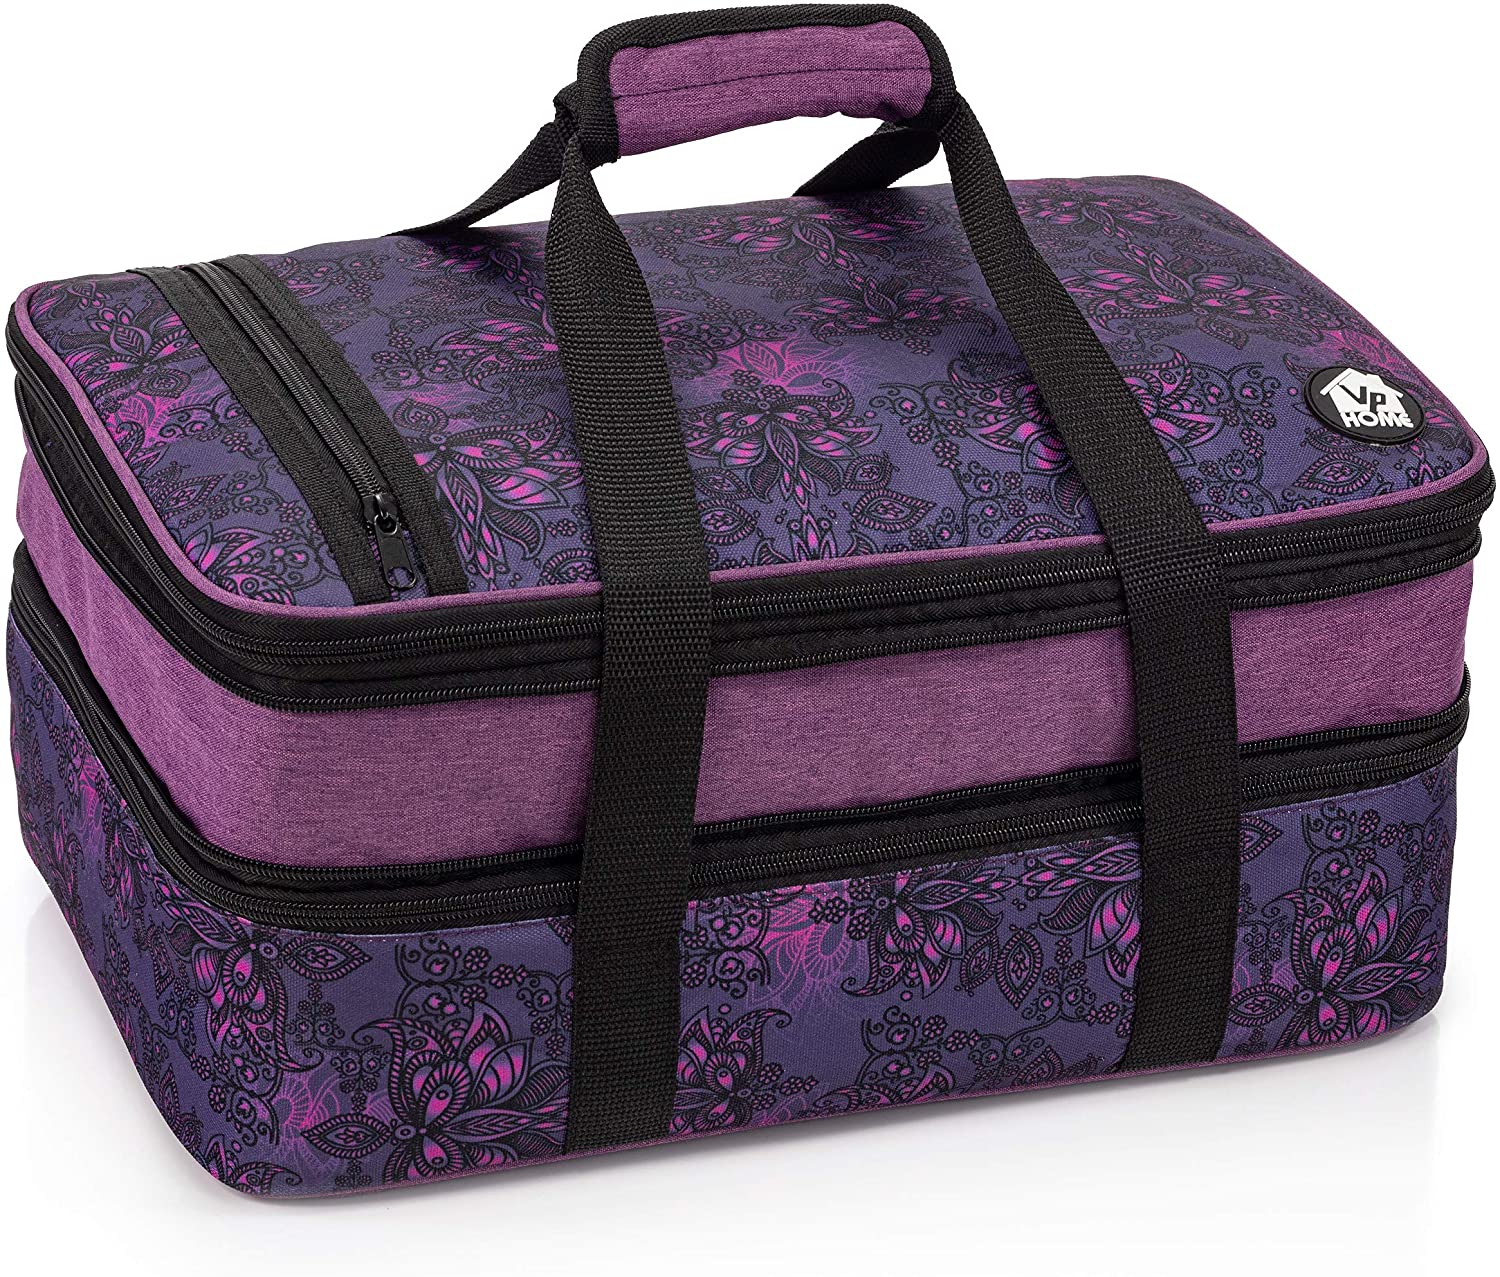 Review of VP Home Double Casserole Insulated Travel Carry Bag (Henna Tattoo)